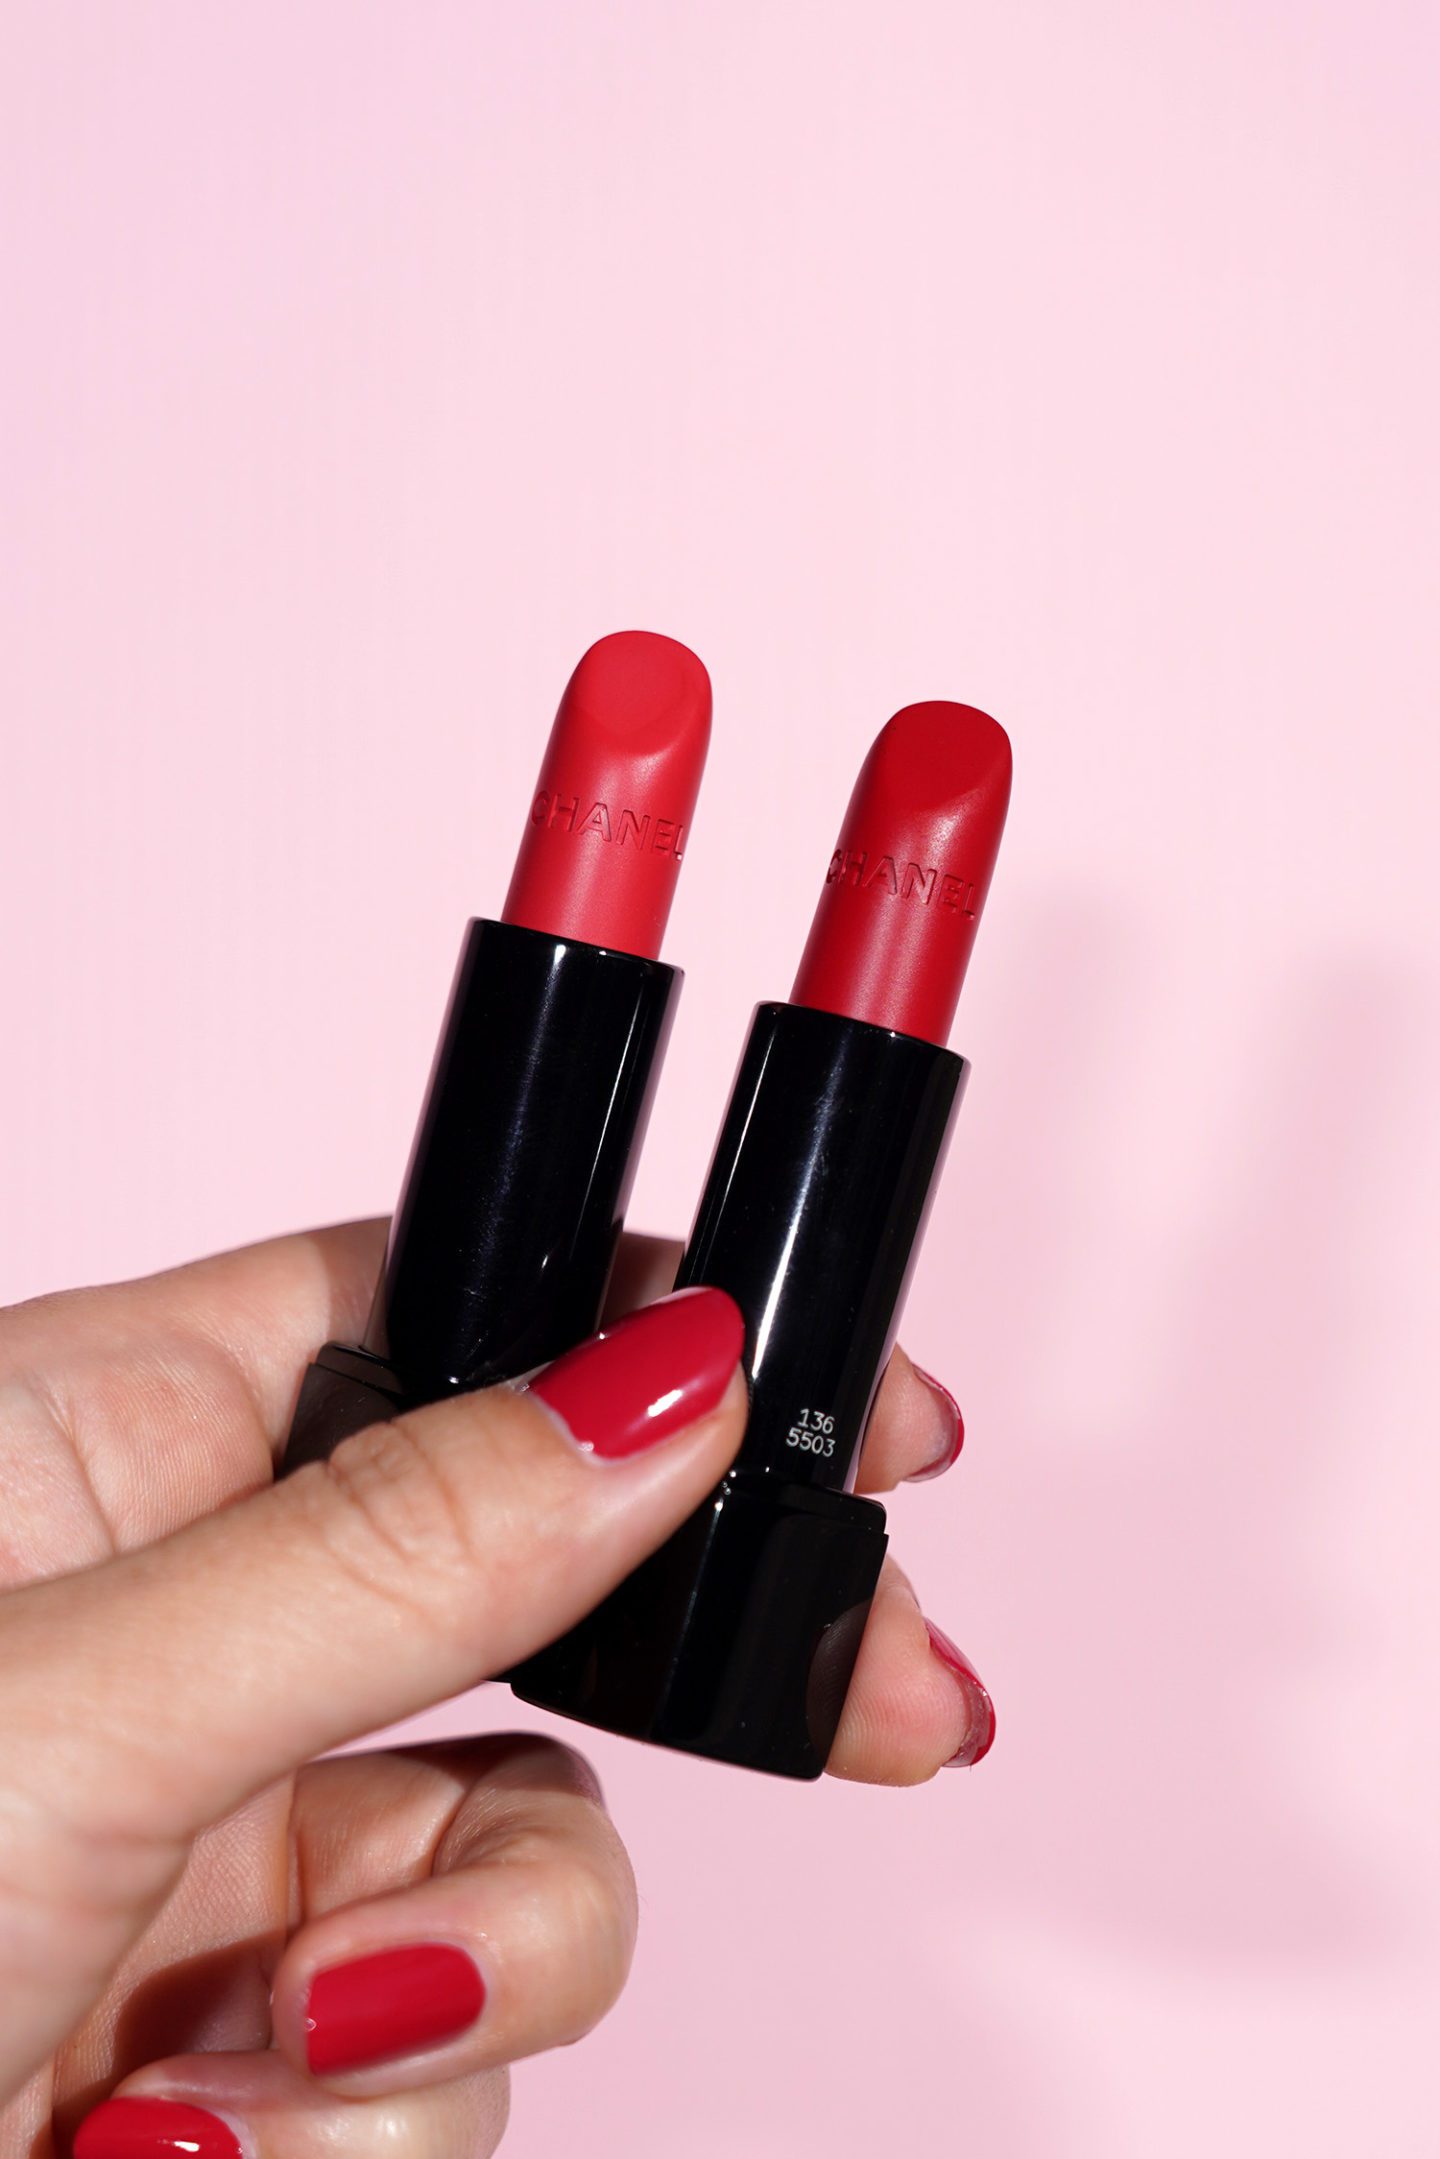 Chanel Rouge Allure Velvet Extreme in 134 Eclosion and 136 Pivoine Noire 